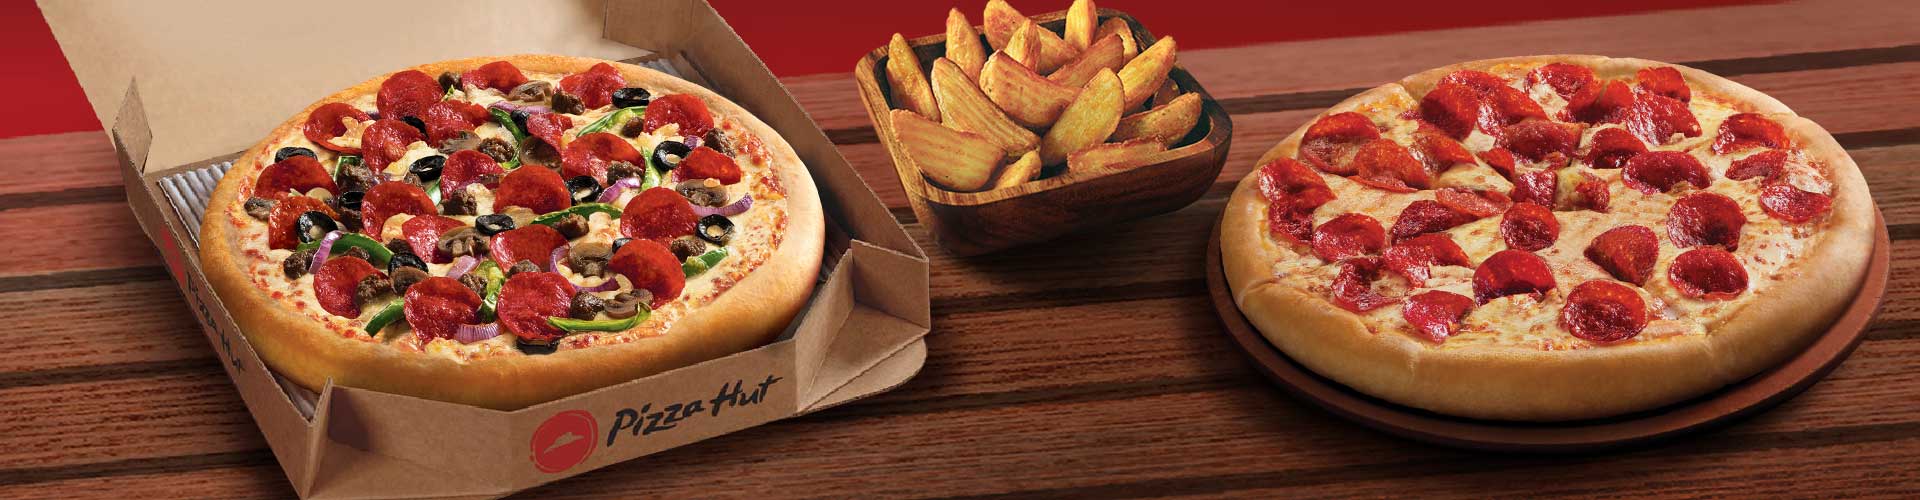 two types of pizza on pizza hut box park 